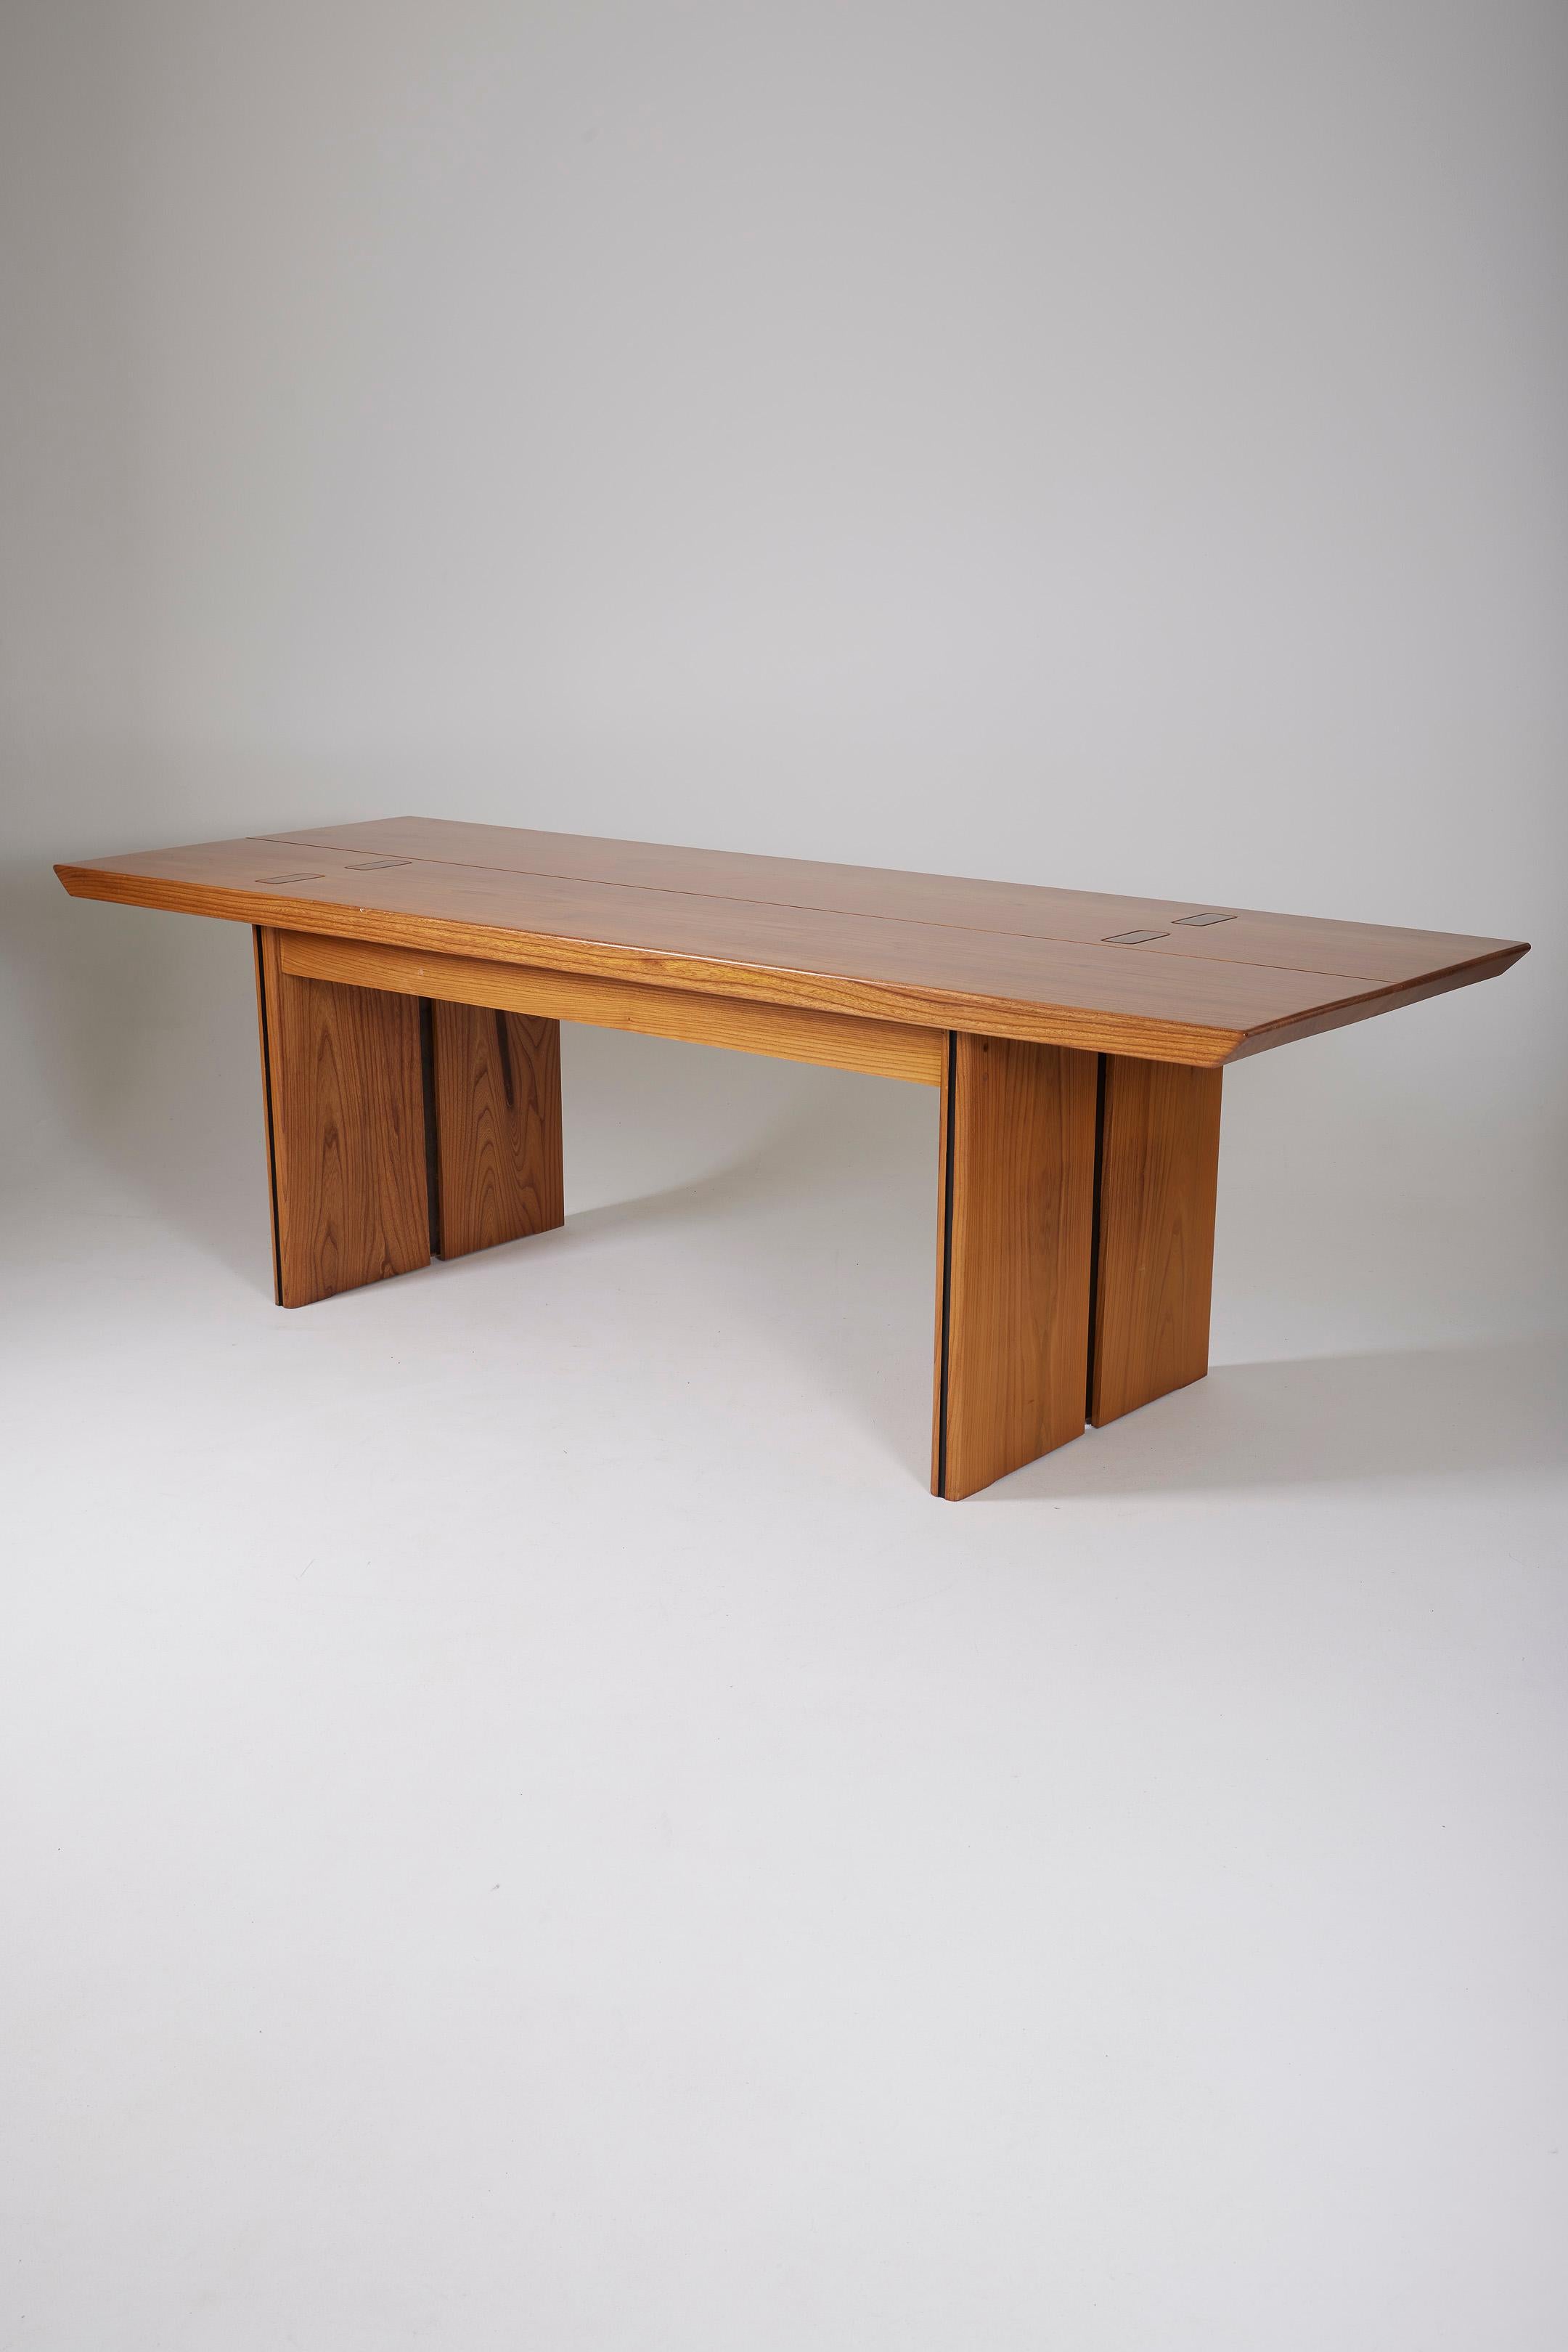 Large solid elm dining table from the 1960s. The rectangular tabletop rests on an attractive base. This large dining table would perfectly complement the furniture of designers Pierre Chapo or Maison Regain.
LP2858